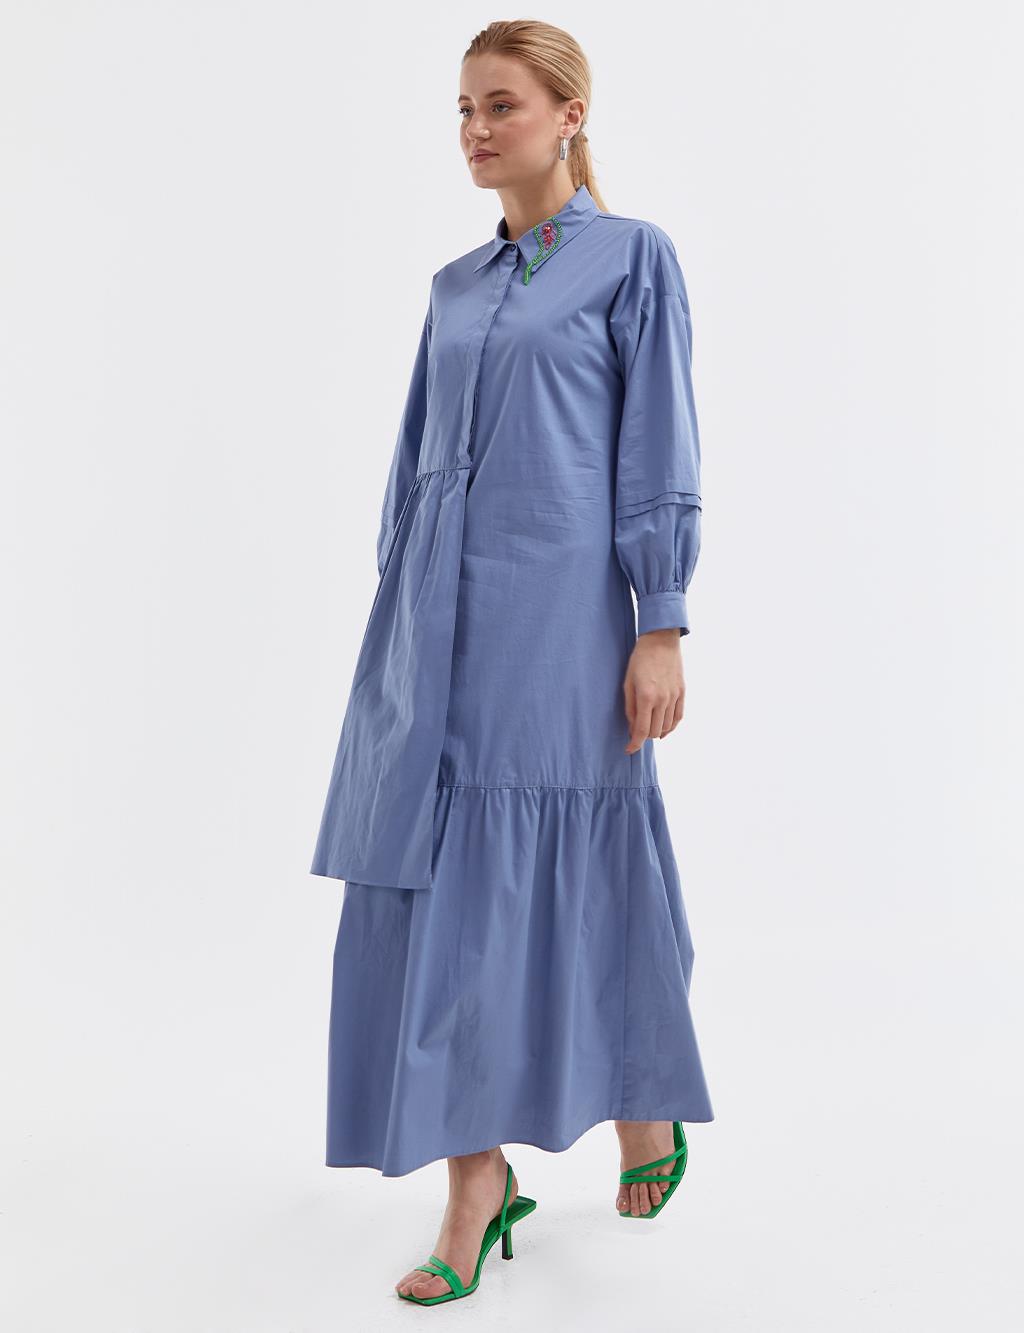 Embroidered Collar Dress Sky Blue